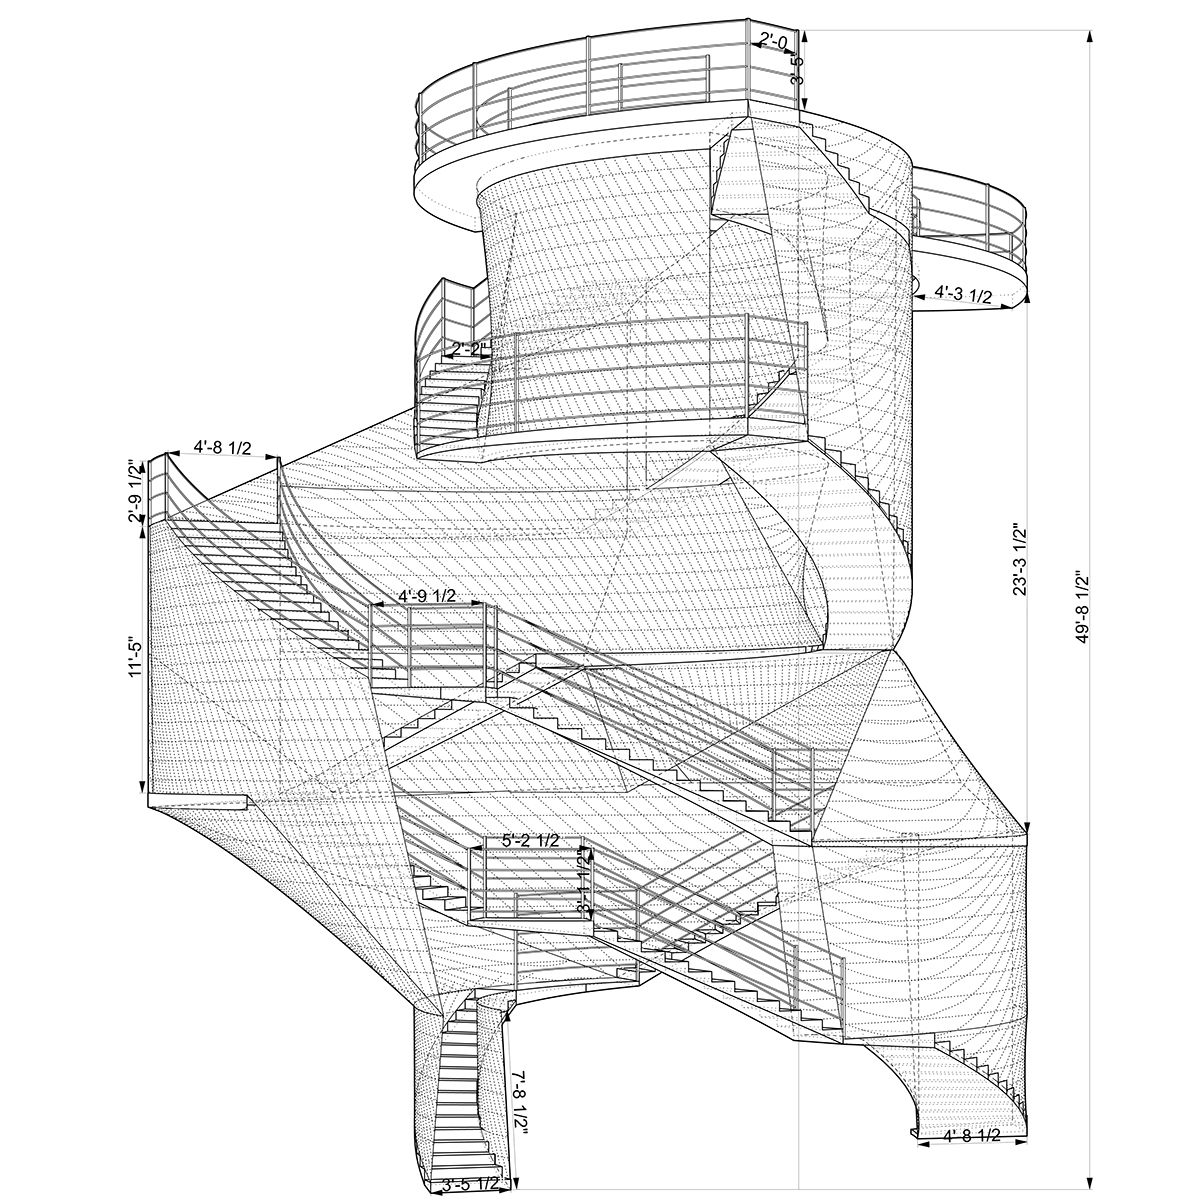 Theater Design architectural diagram diagrammatic Architectural Drawing Drafting Section drawing Construction Documents